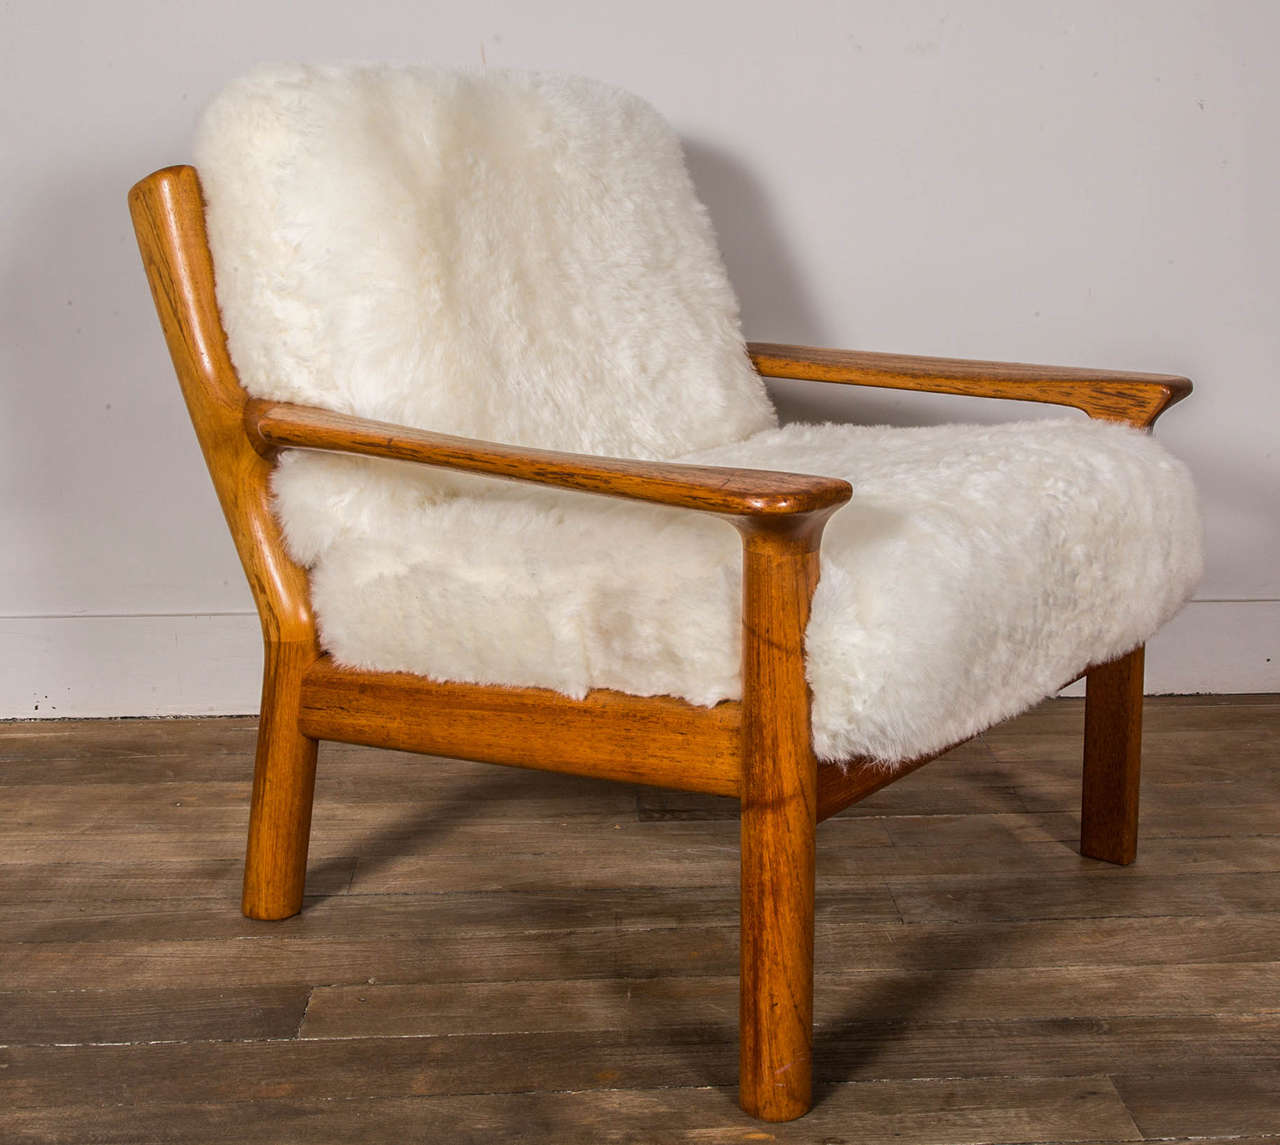 A pair of teak lounge chairs re-upholstered in sheep skin. 
Glostrup Mobelfabrik ( labelled) 
Denmark,
Circa 1970.